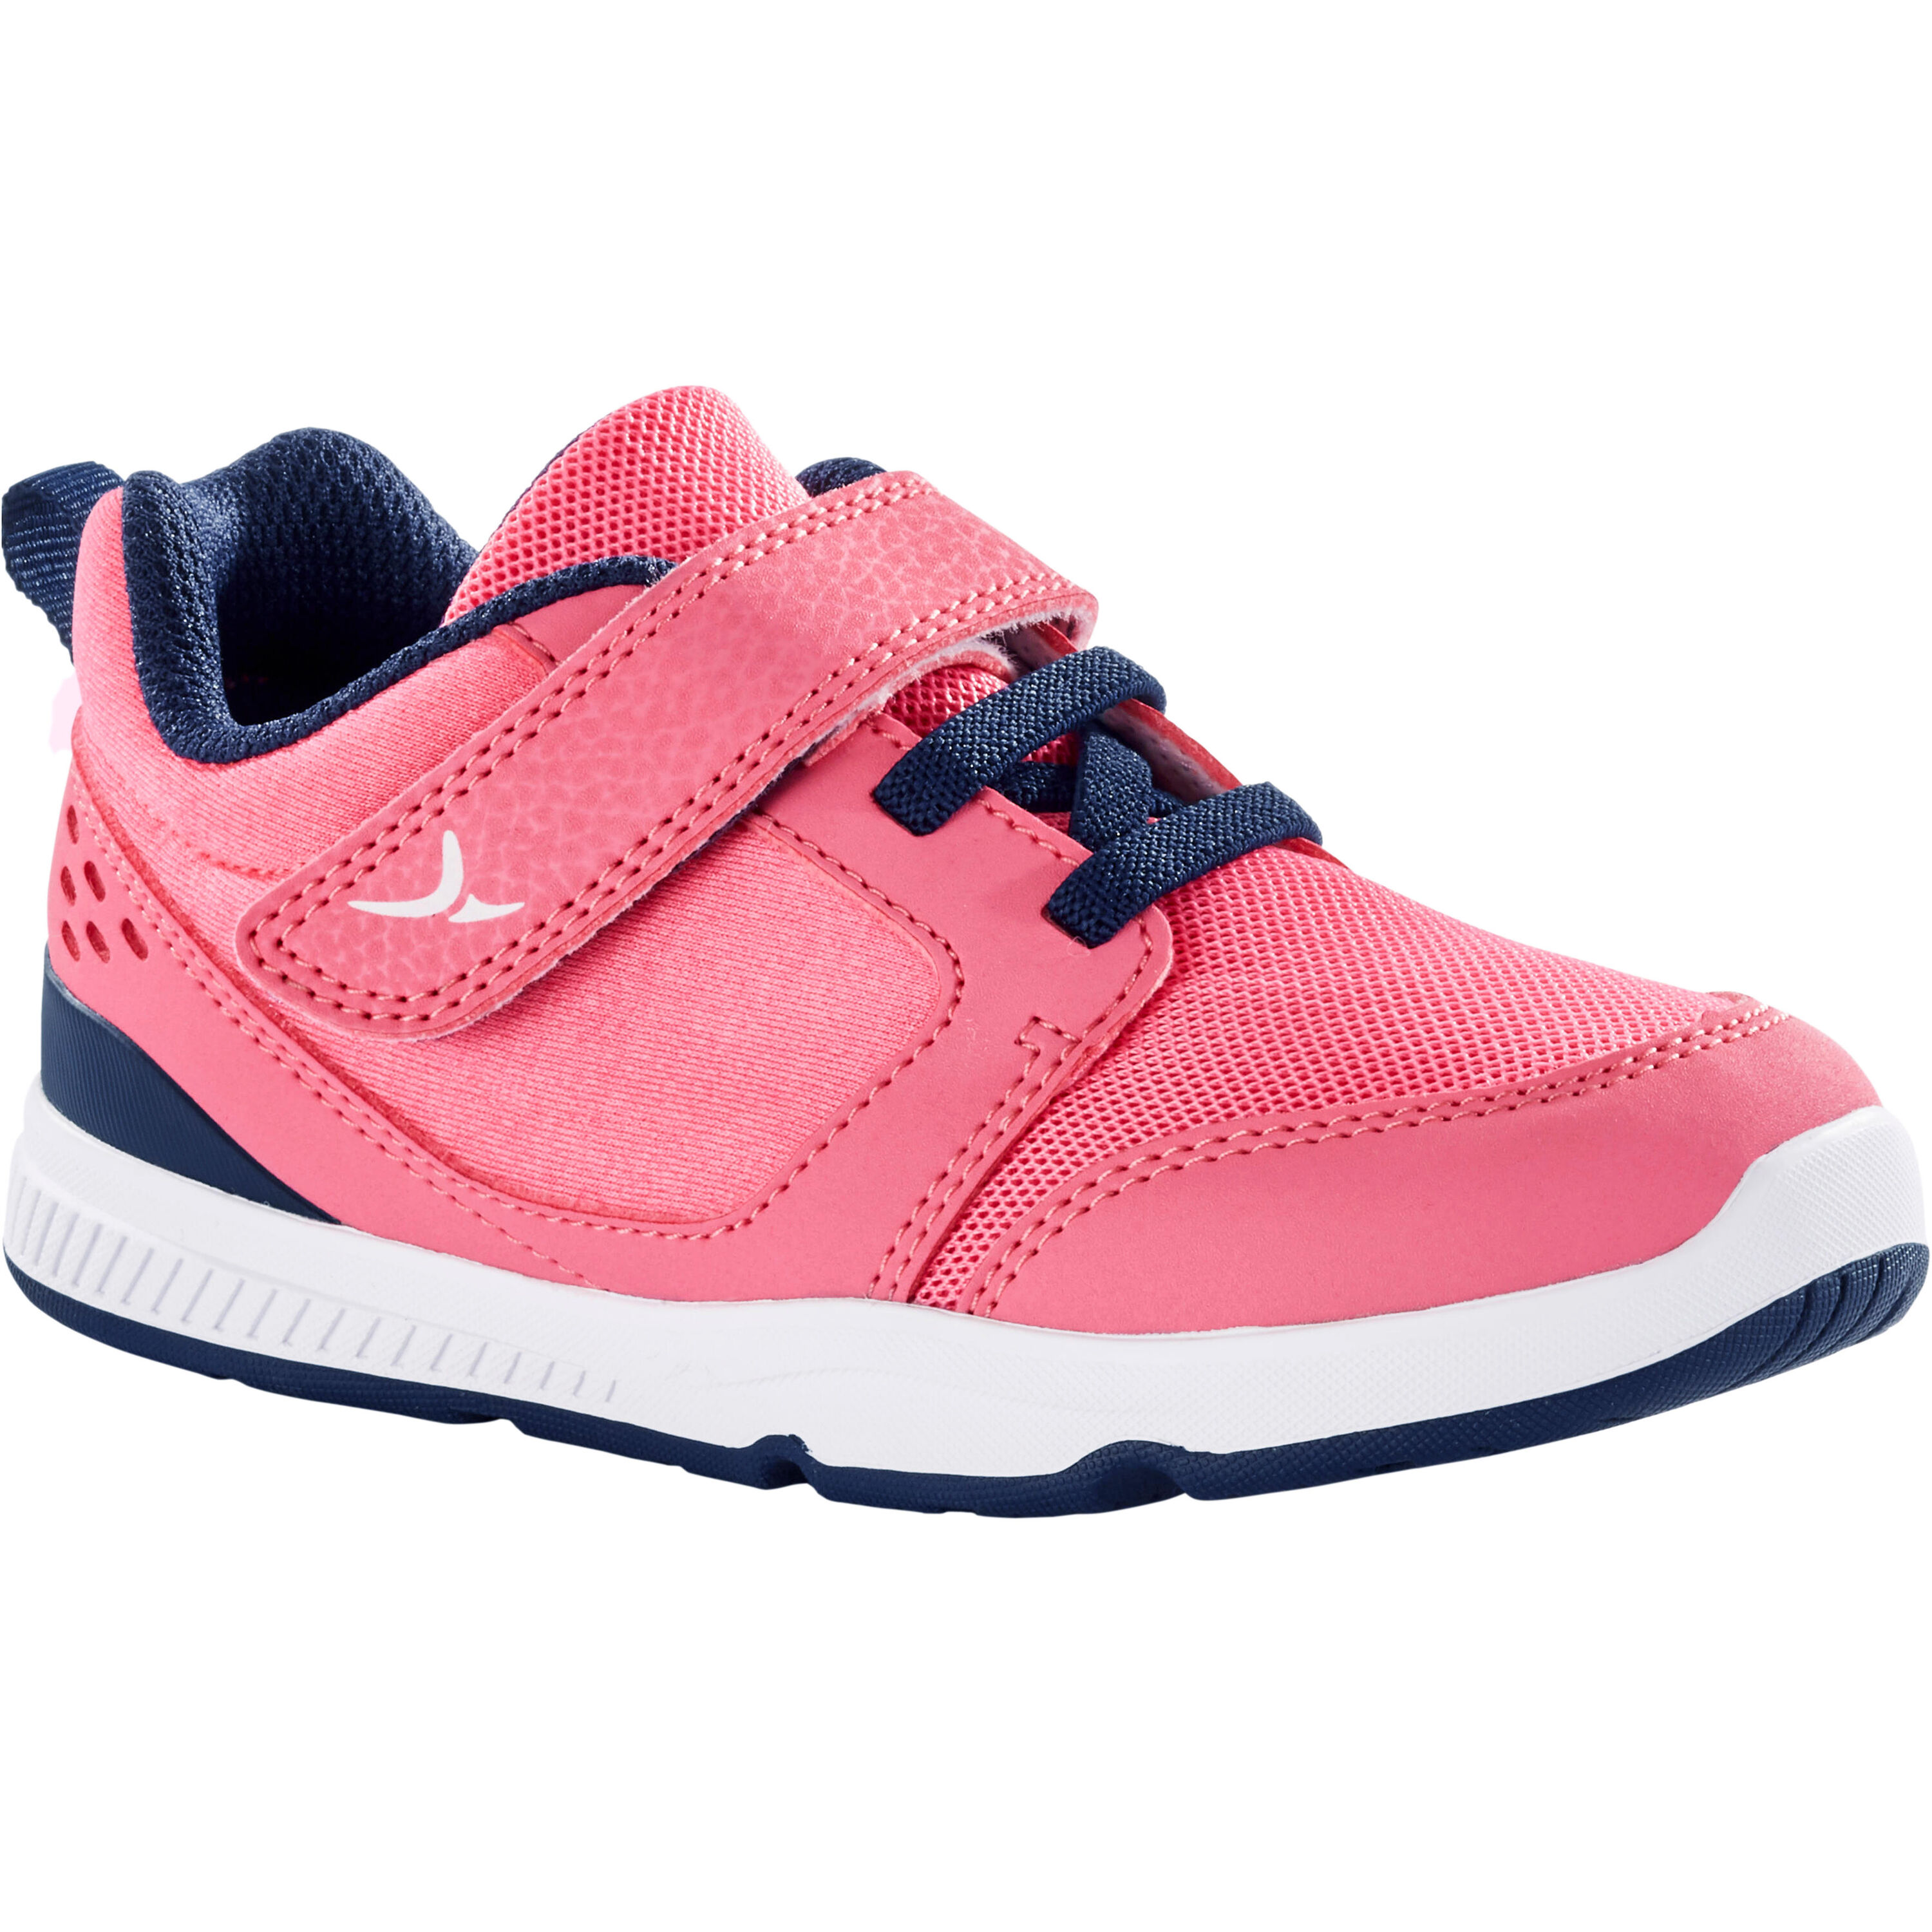 DOMYOS Kids' Comfortable and Breathable Shoes